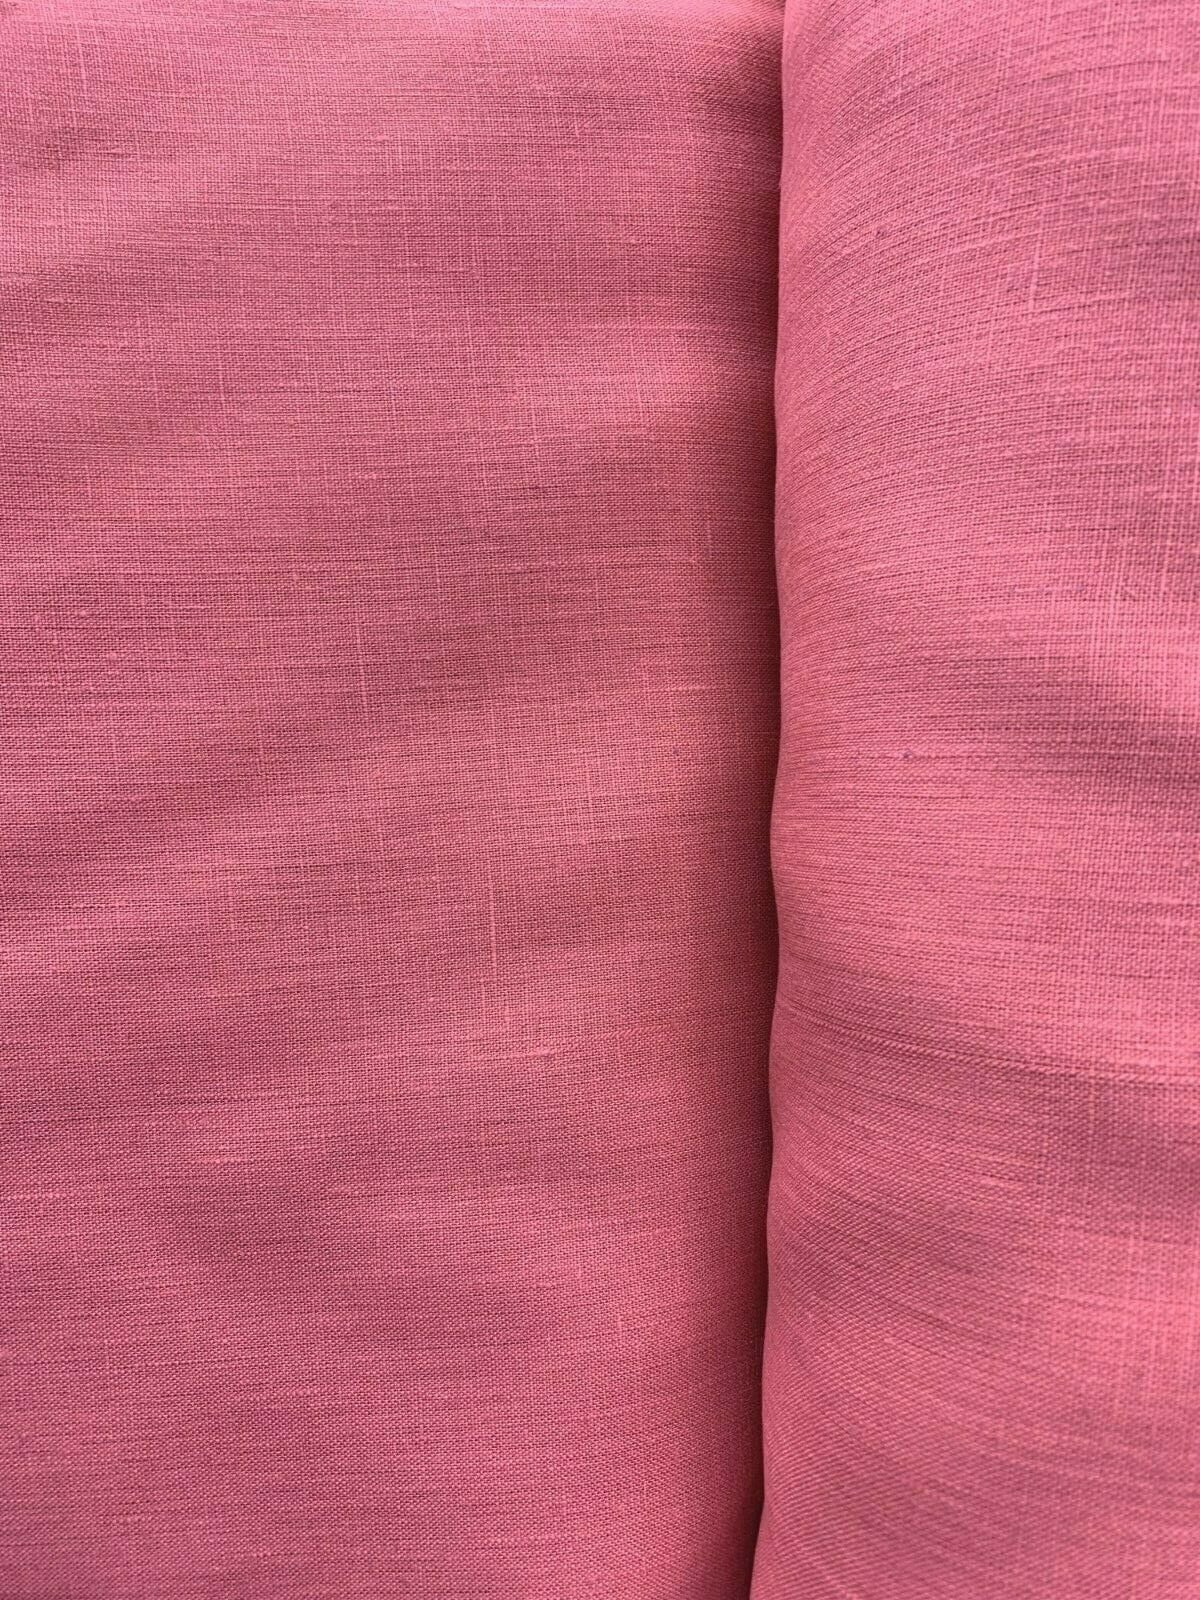 CORAL PINK 100% Linen Fabric (60 in.) Sold By The Yard